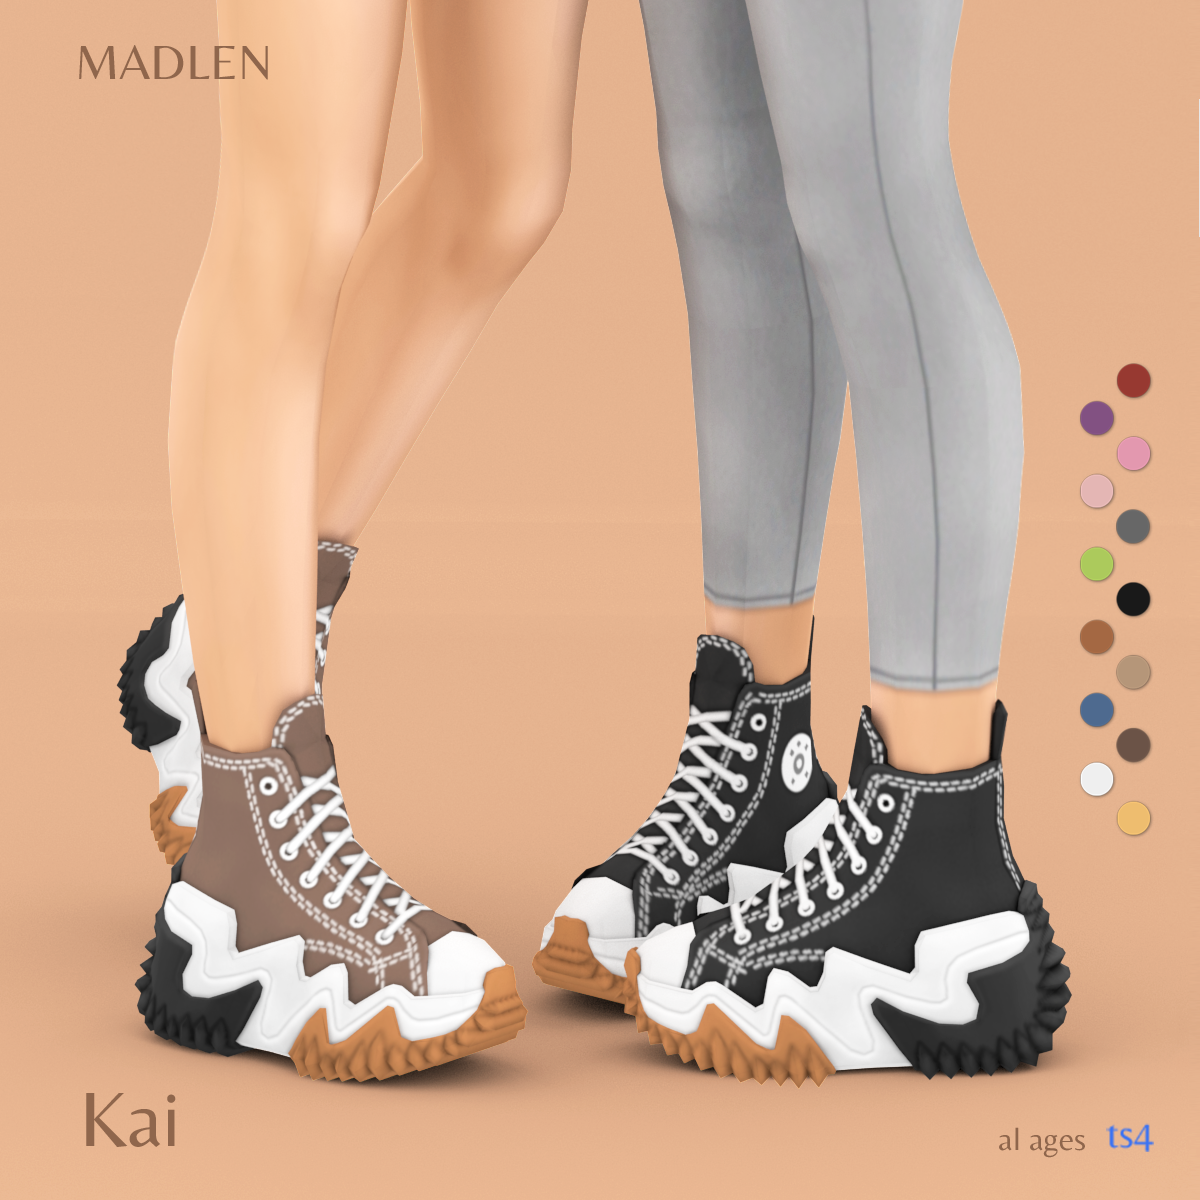 Madlen — Kai Sneakers Unisex high top shoes available